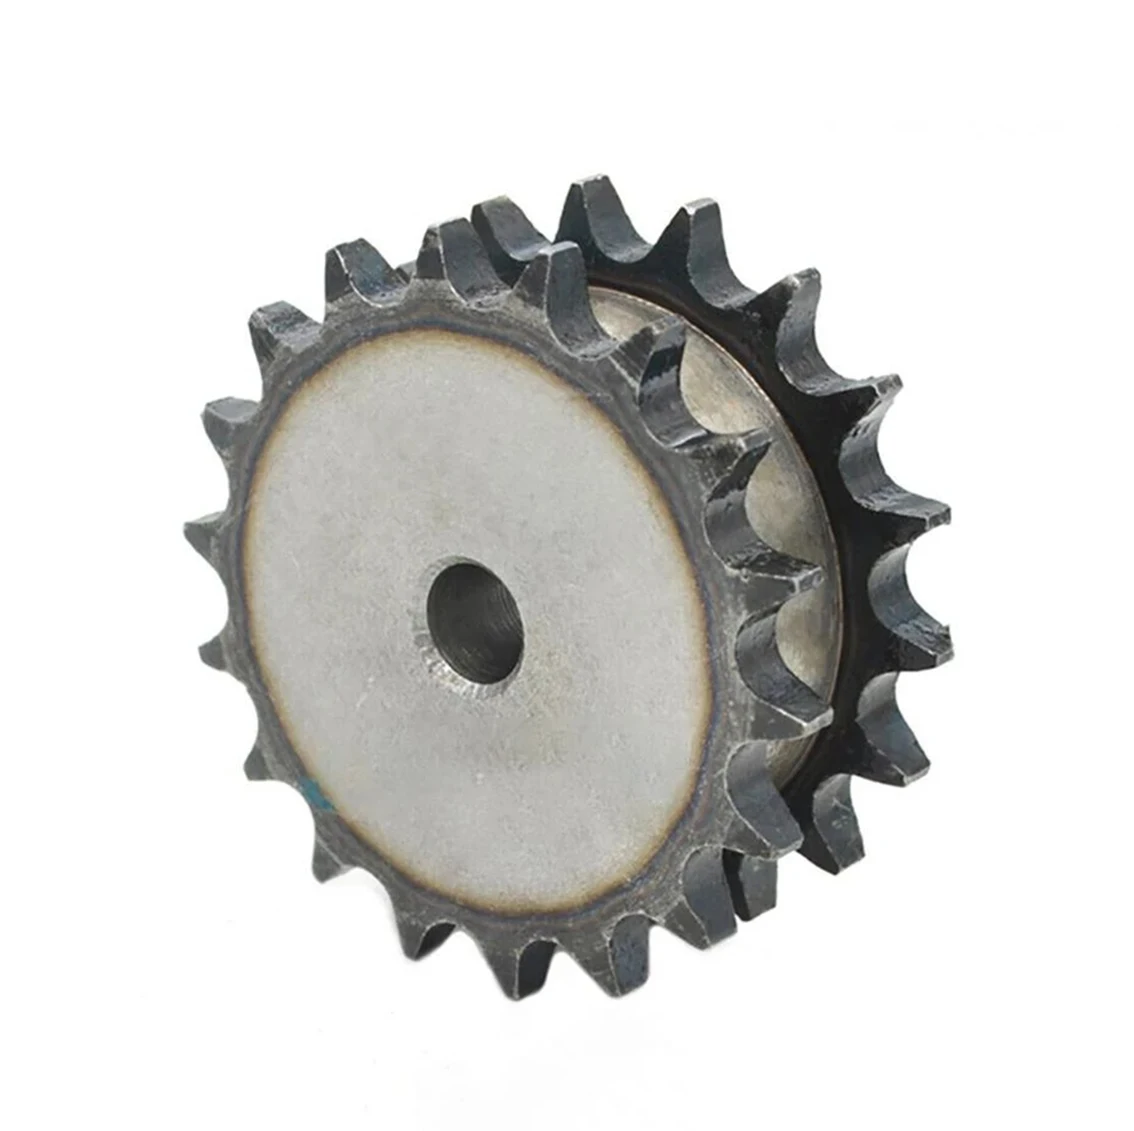 1Pcs 08B Double Row Sprockets 45# Steel 10-26 Tooth 12mm-18mm Bore Industrial Sprocket Wheel Motor Chain Drive